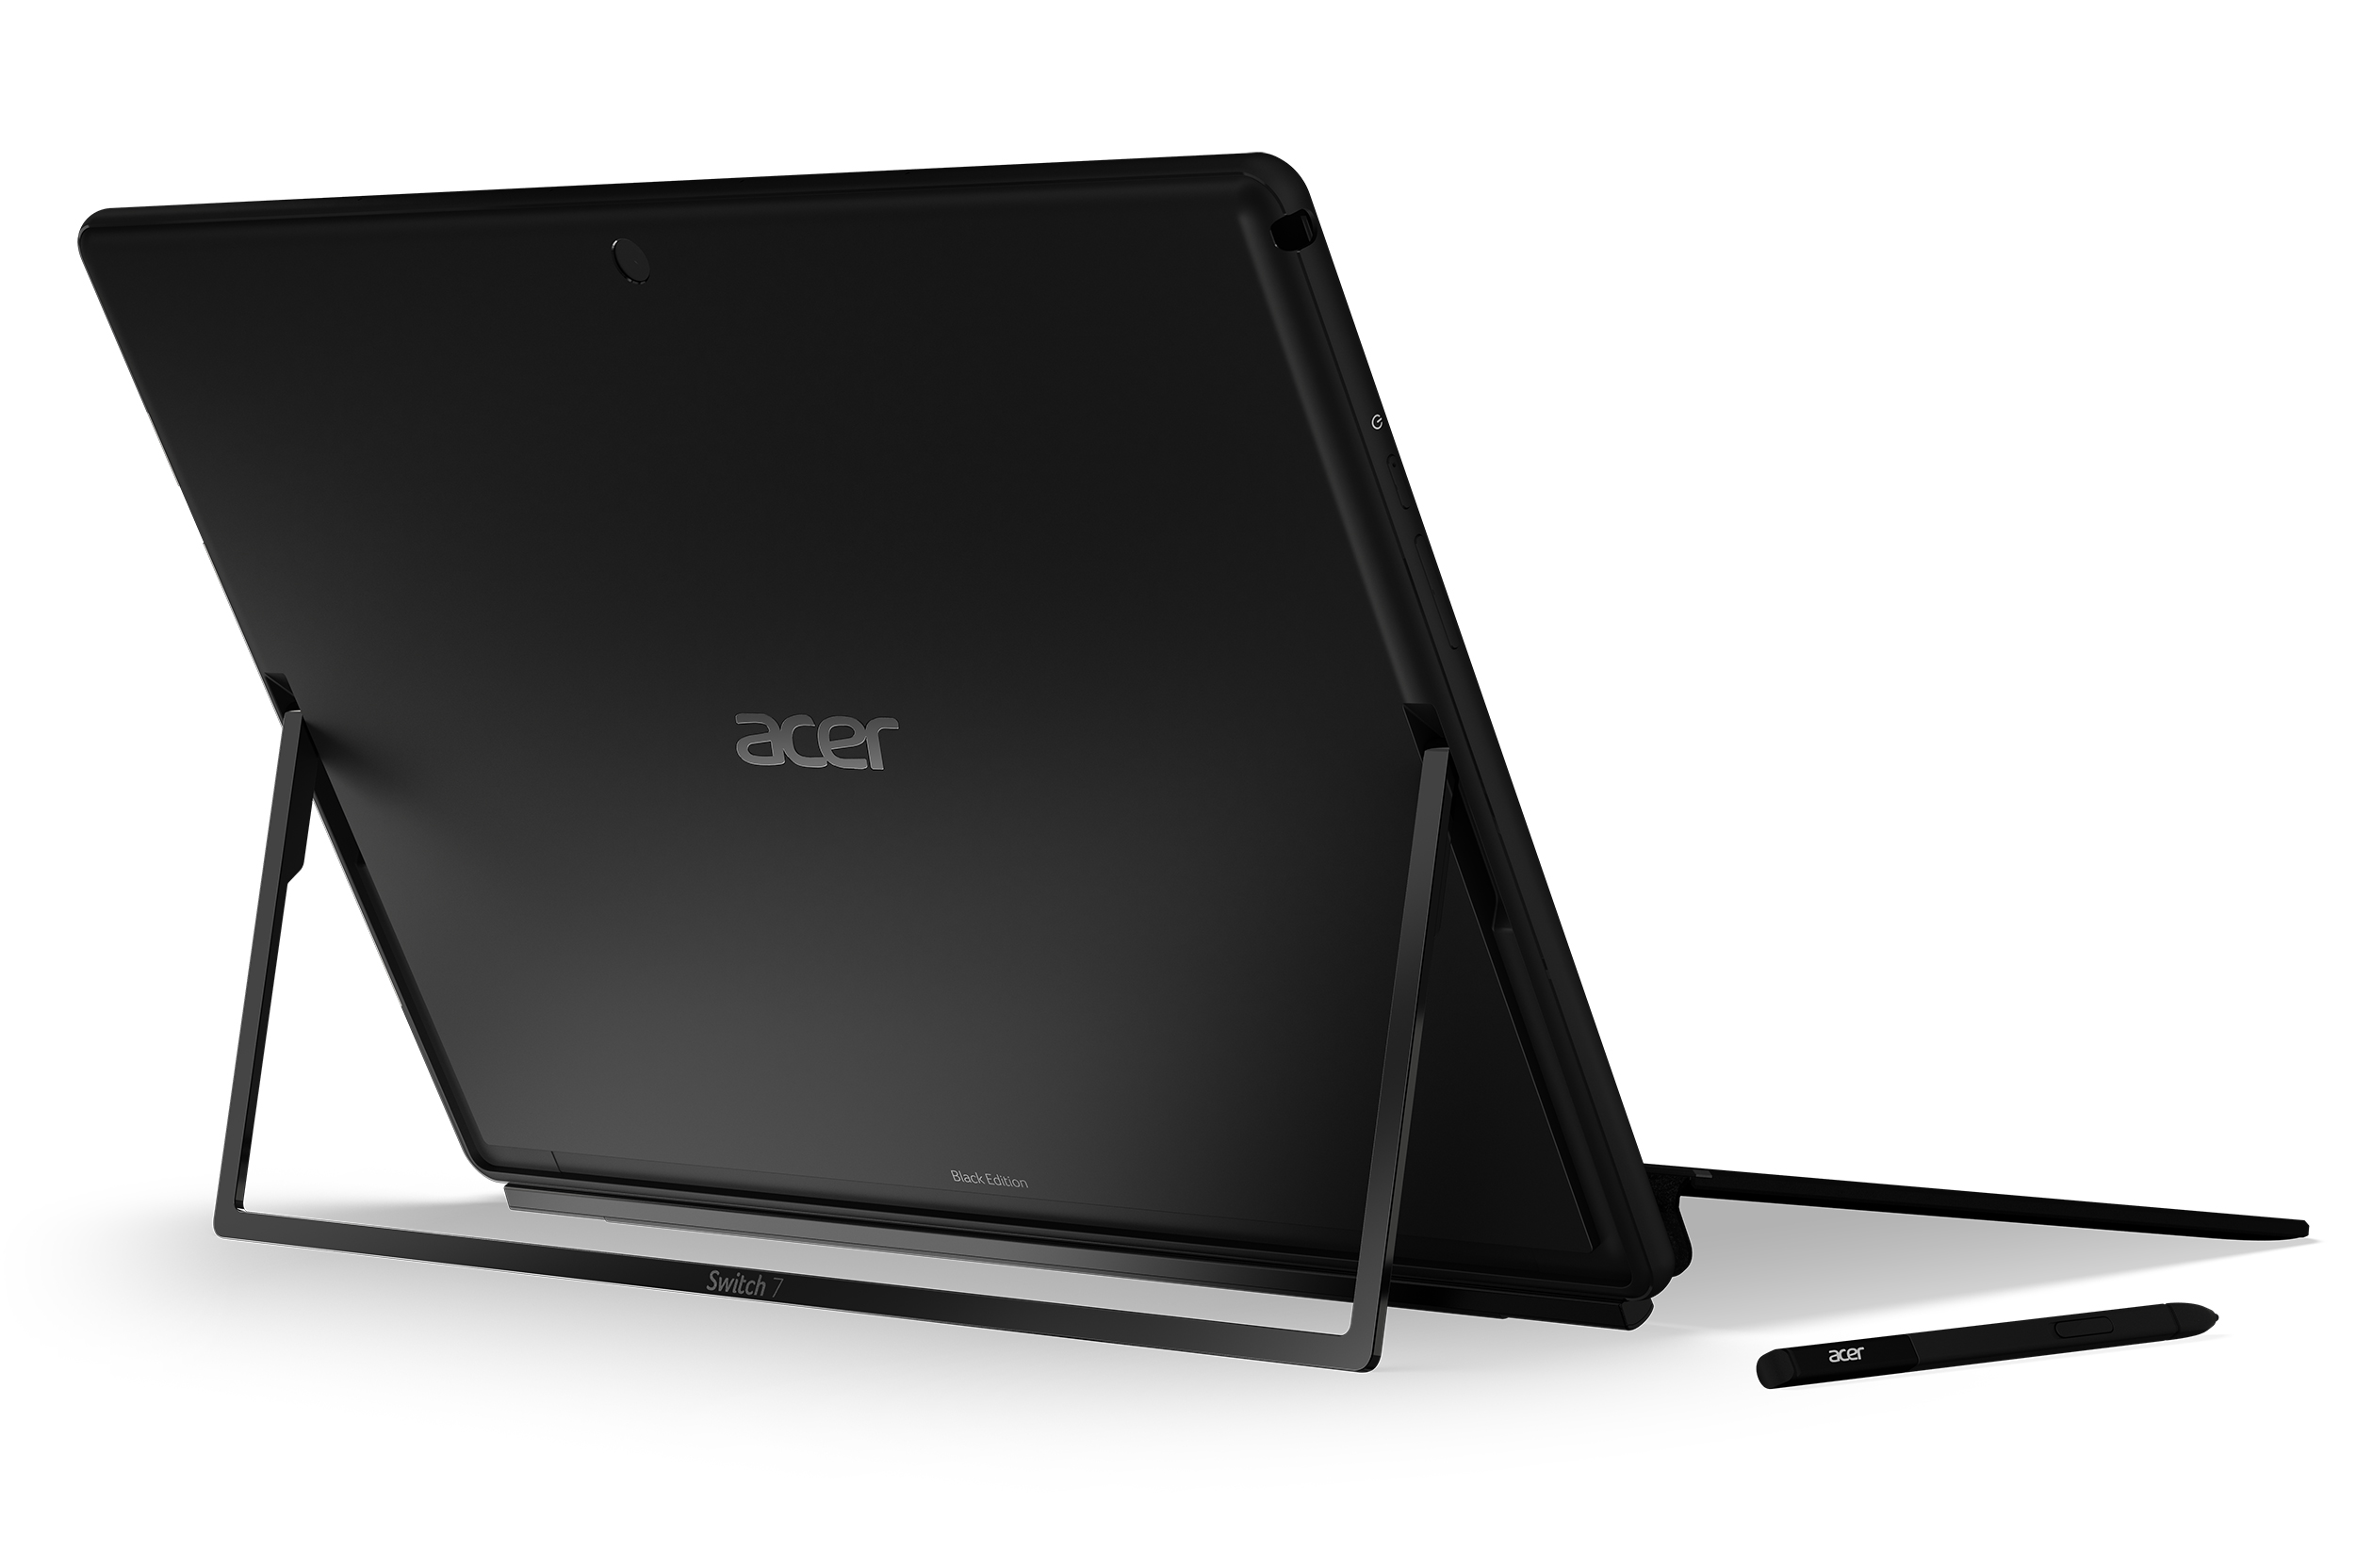 acer announces new laptop lineup at ifa 2017 switch7 be 06